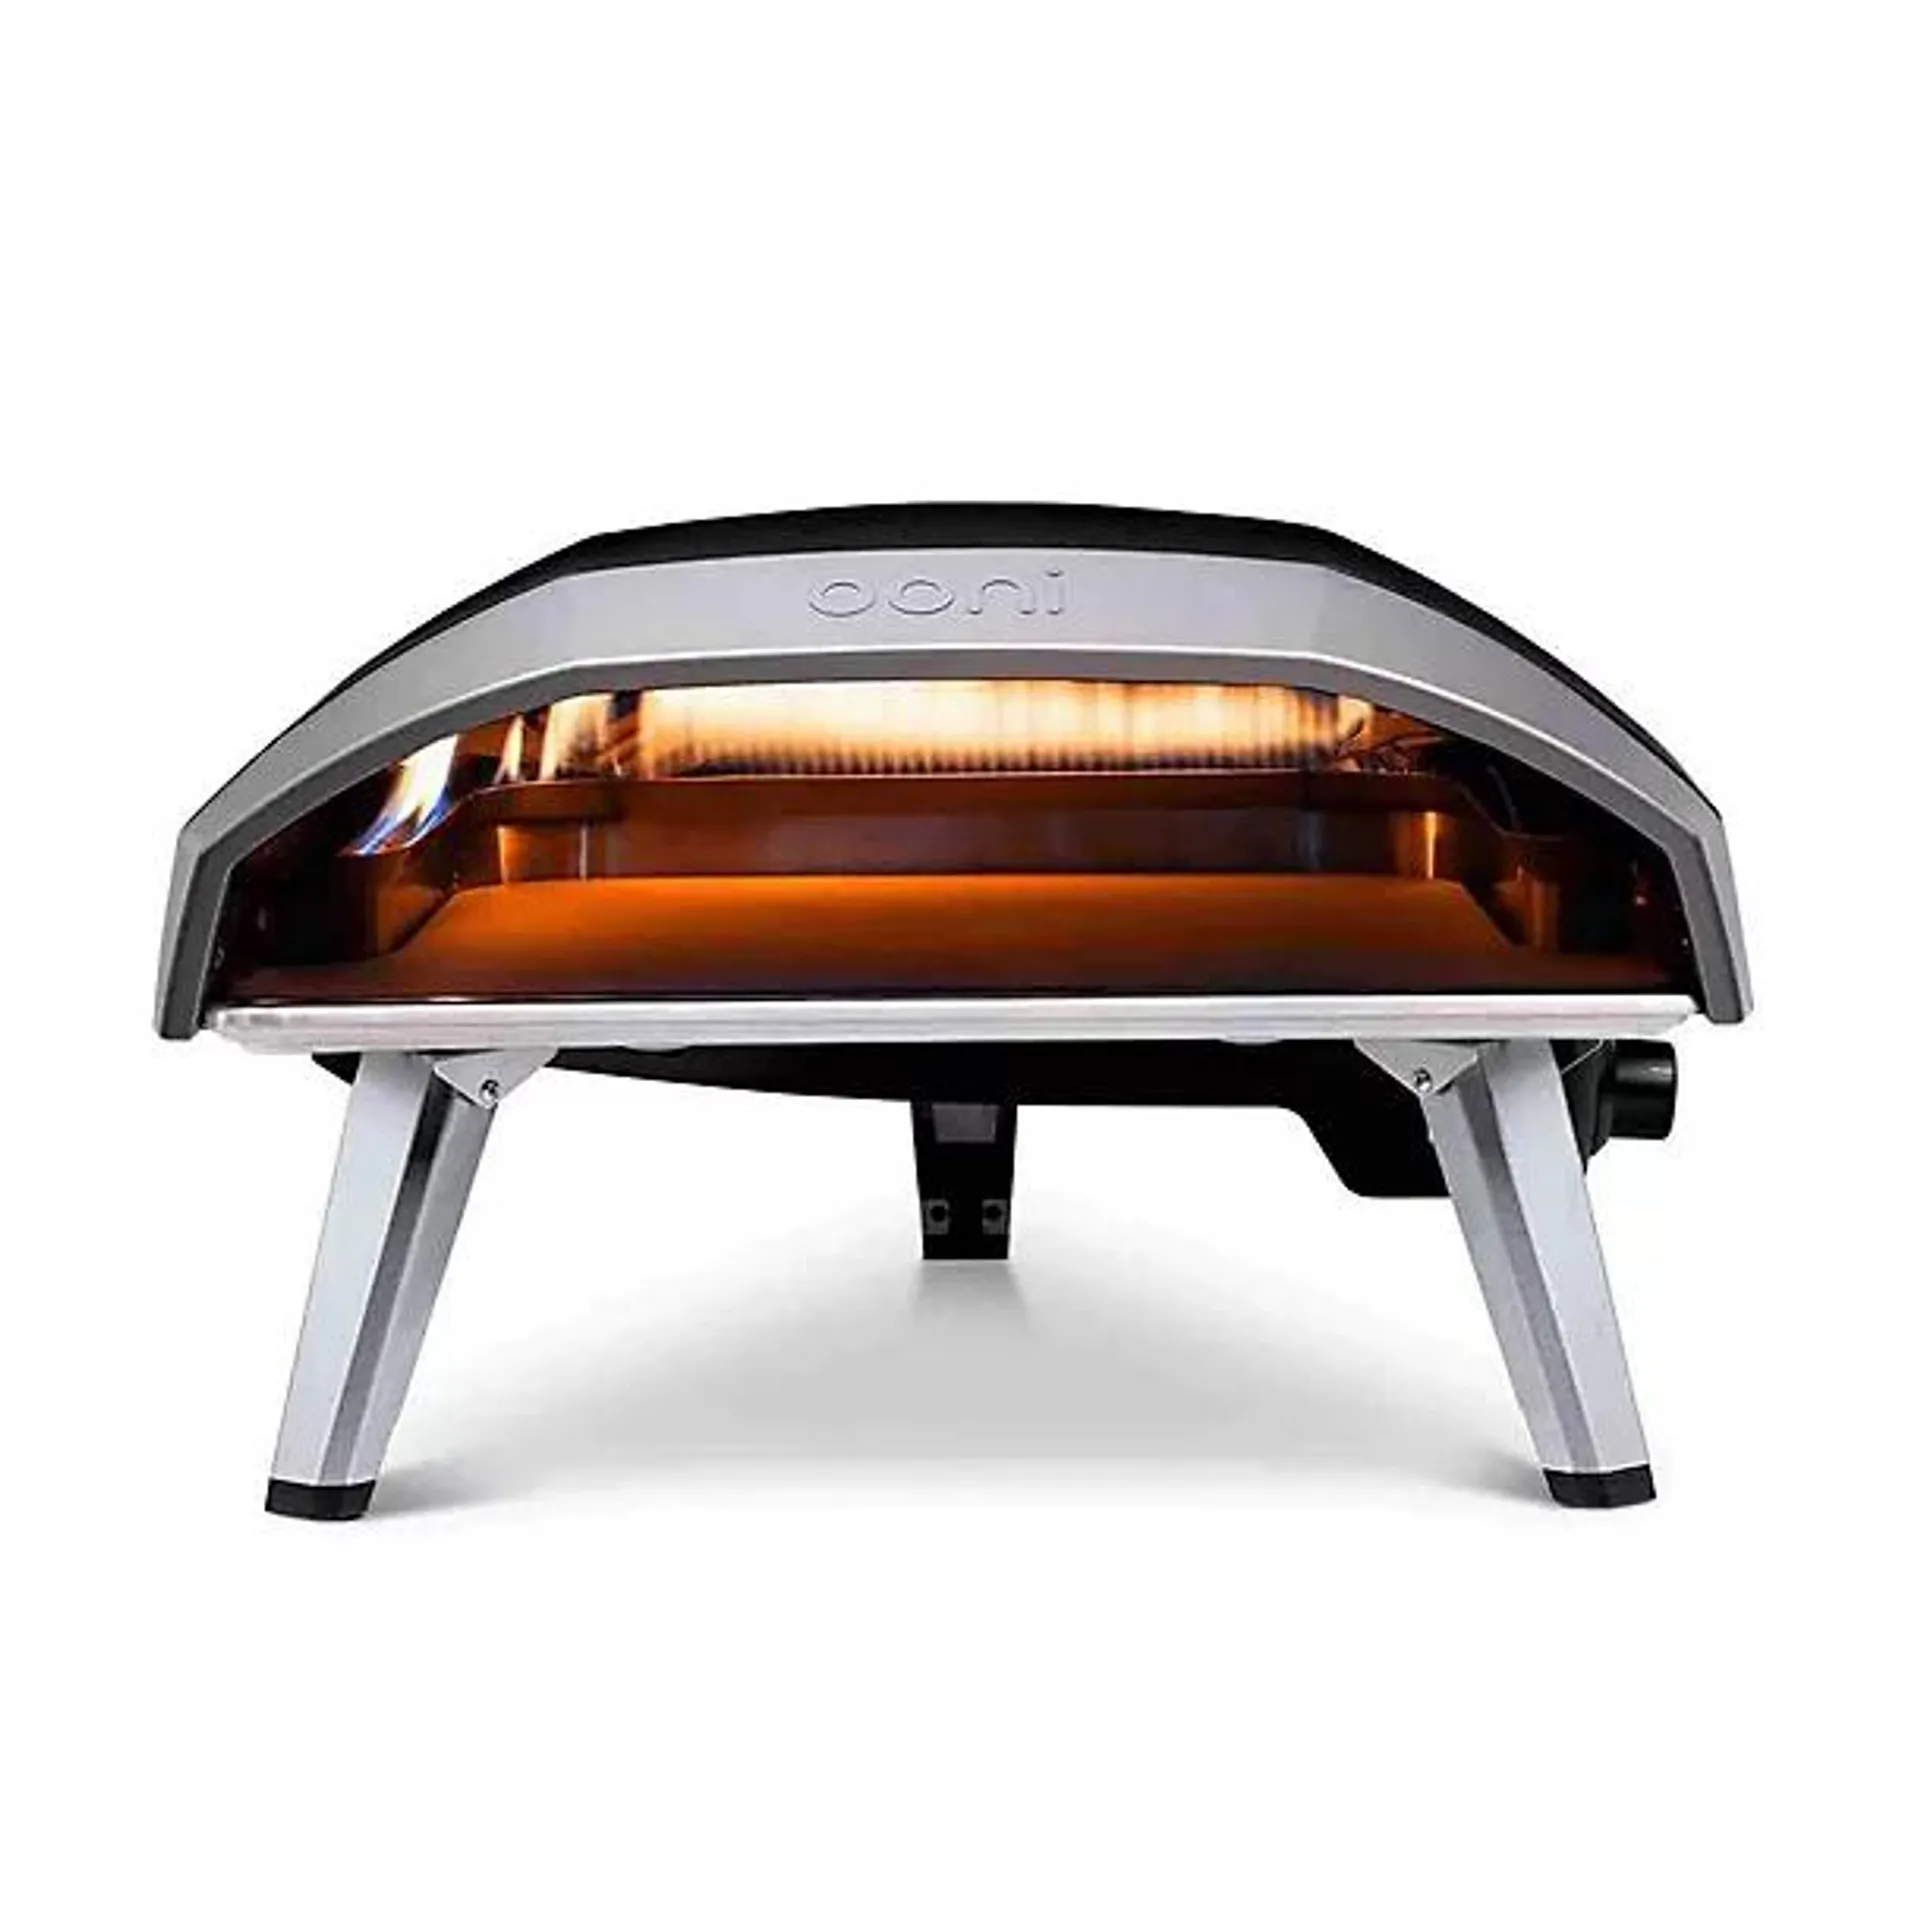 Ooni Koda 16 Gas-Fired Outdoor Pizza Oven with Baking Stone